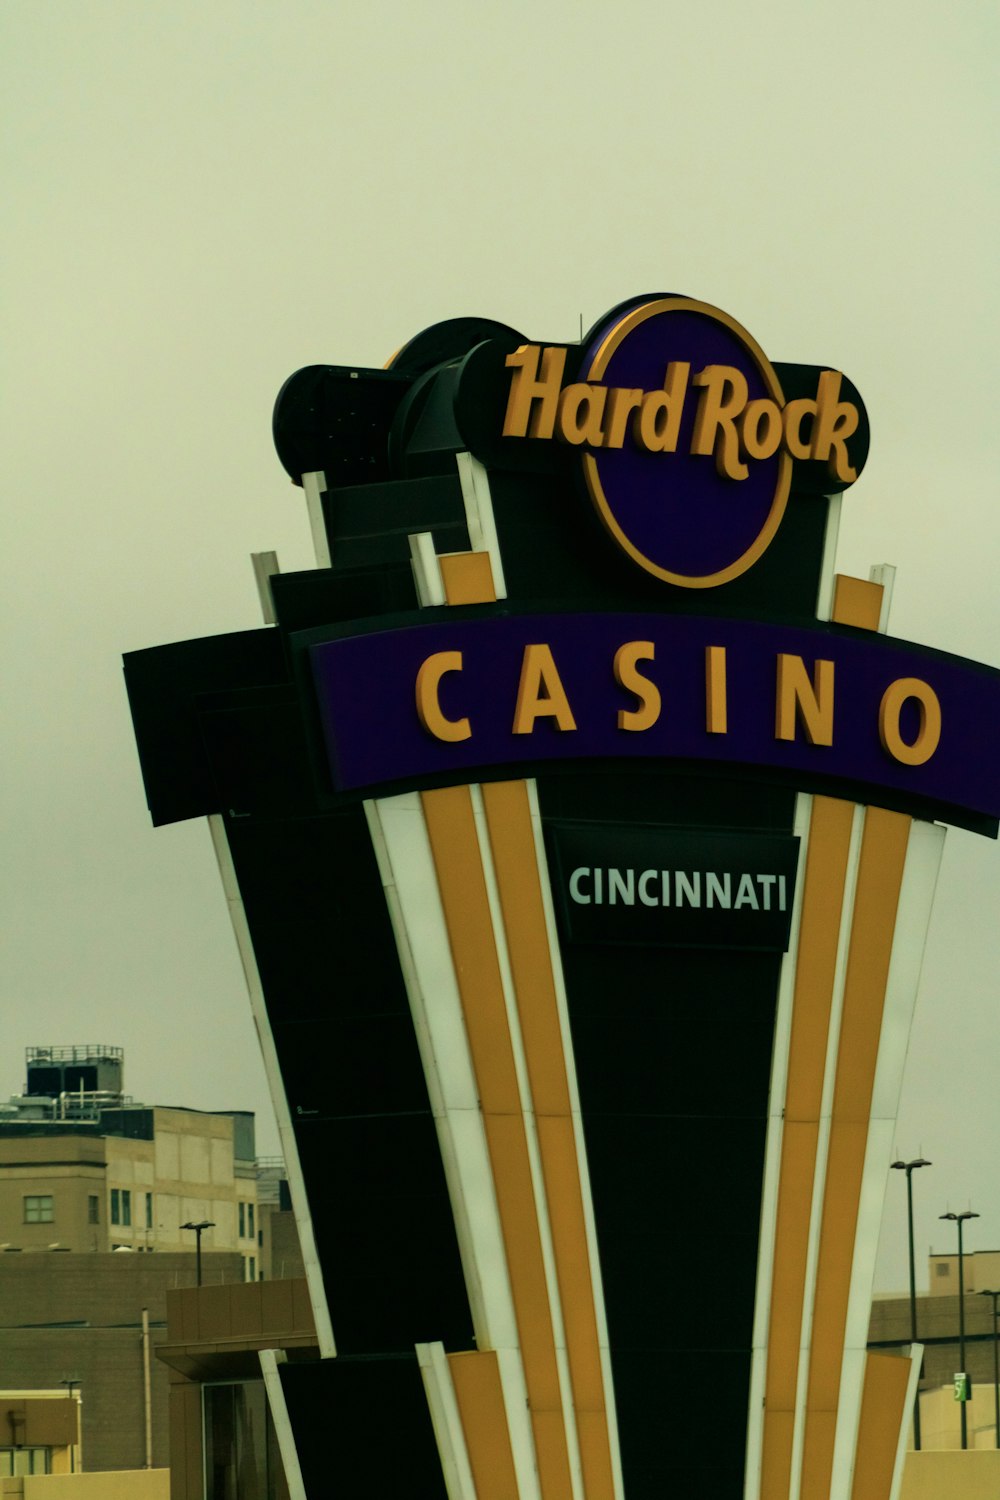 a sign for a casino called hard rock casino